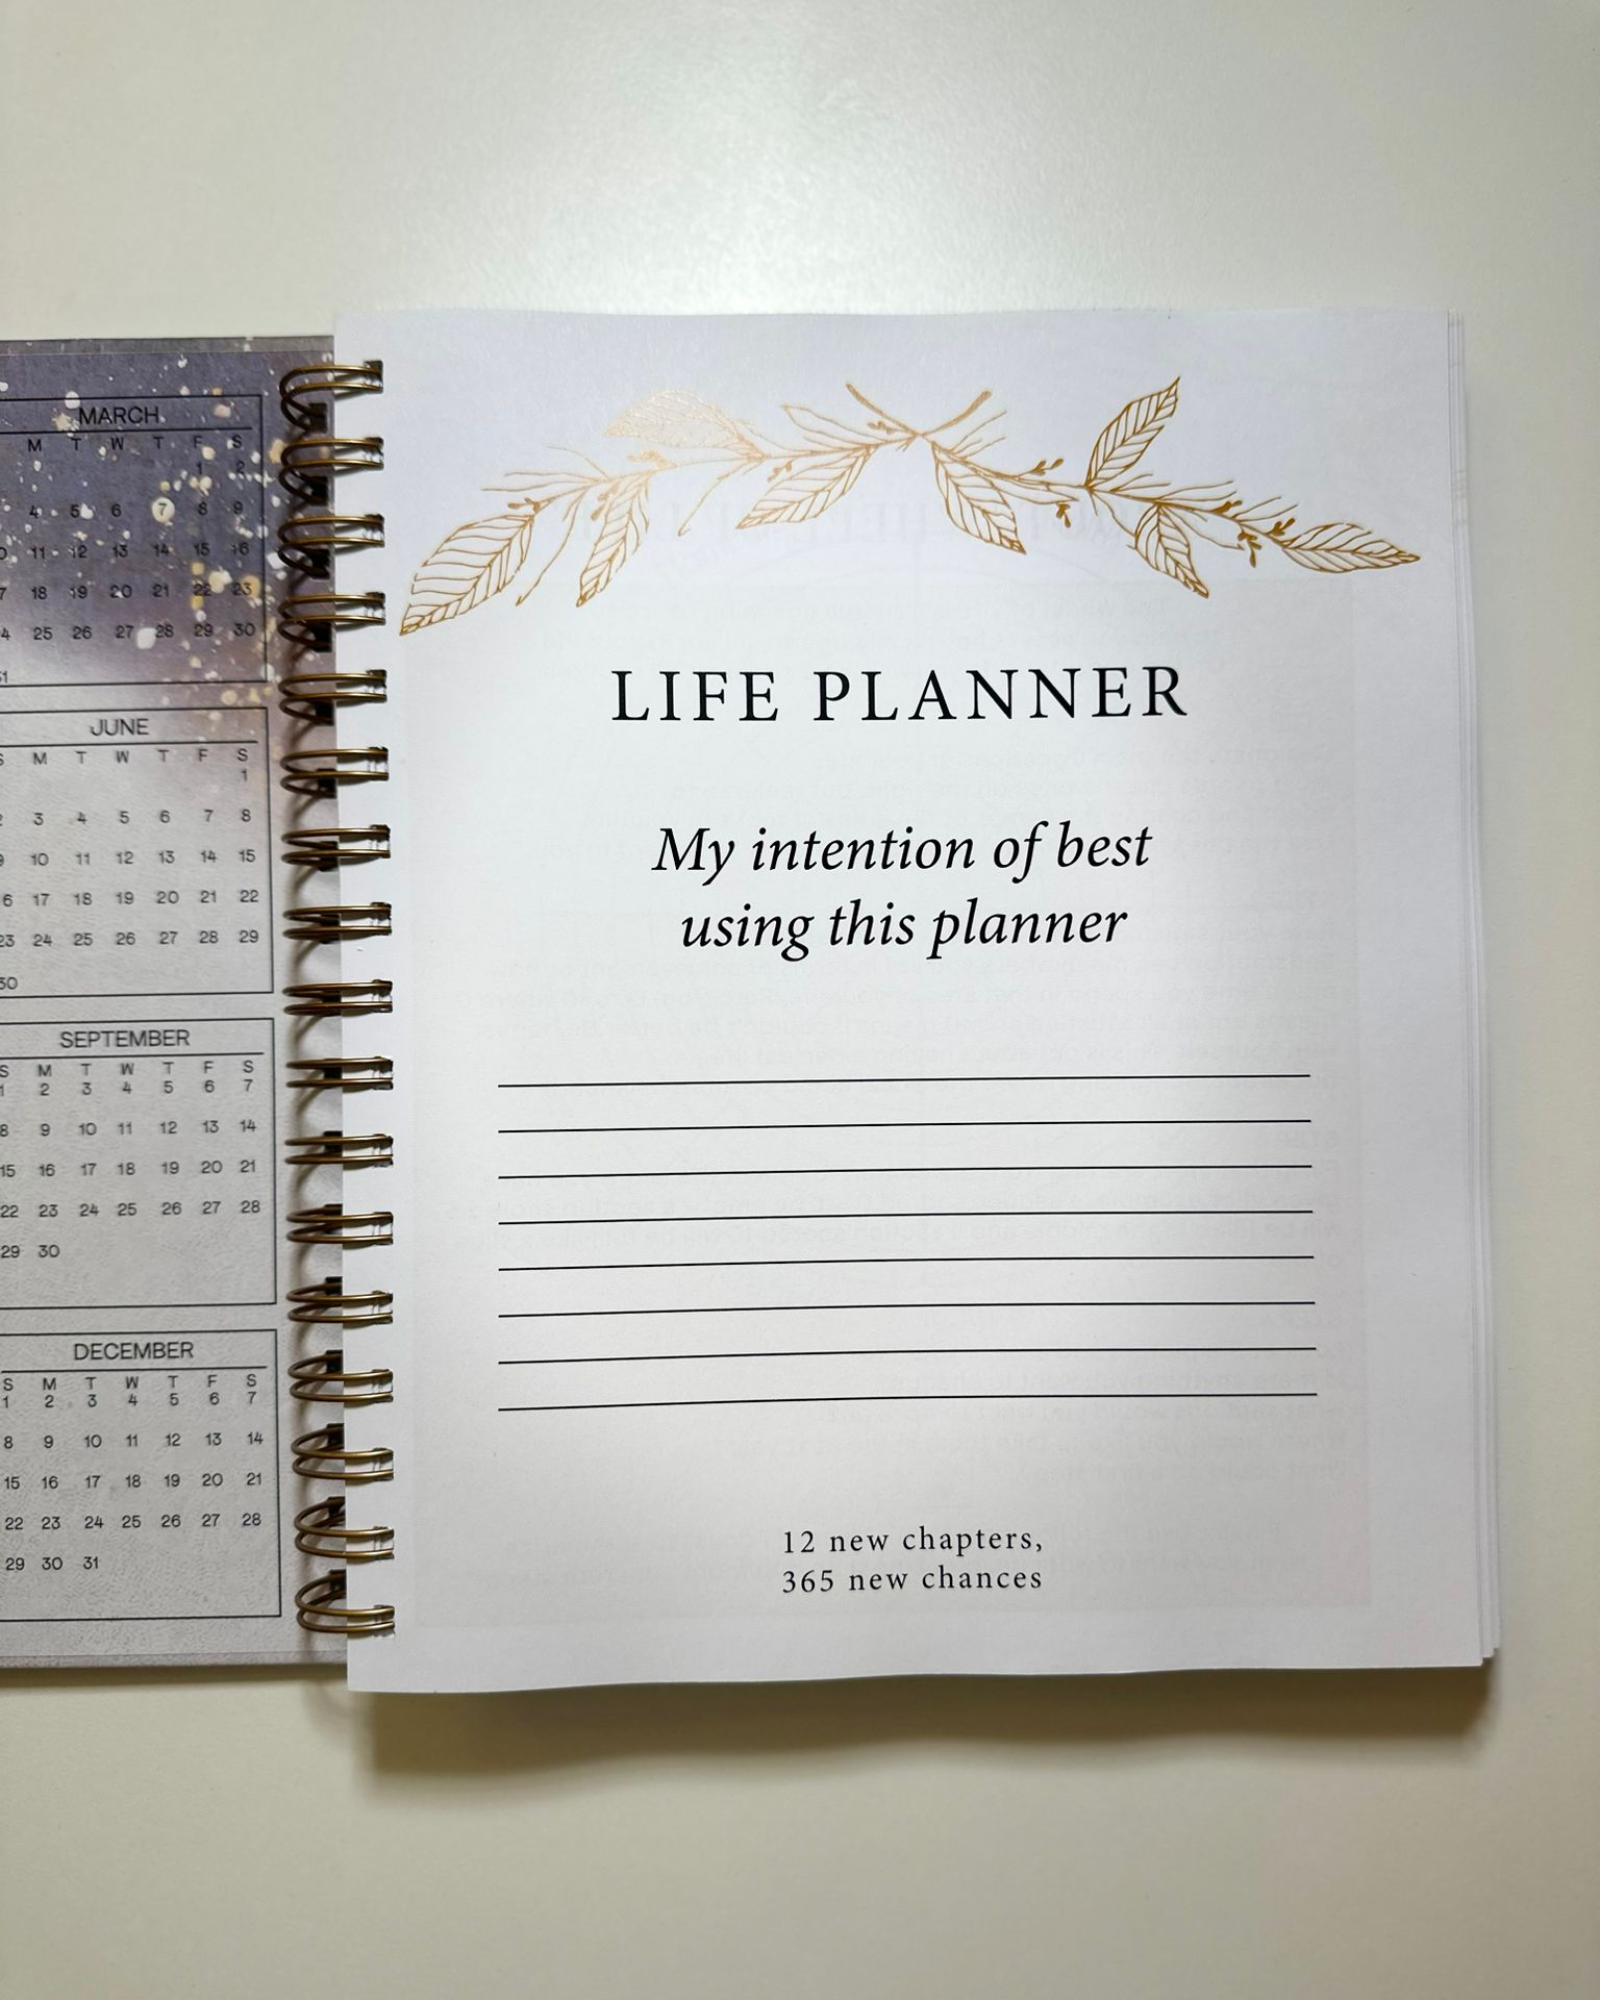 Life Planner “CONNECTION”